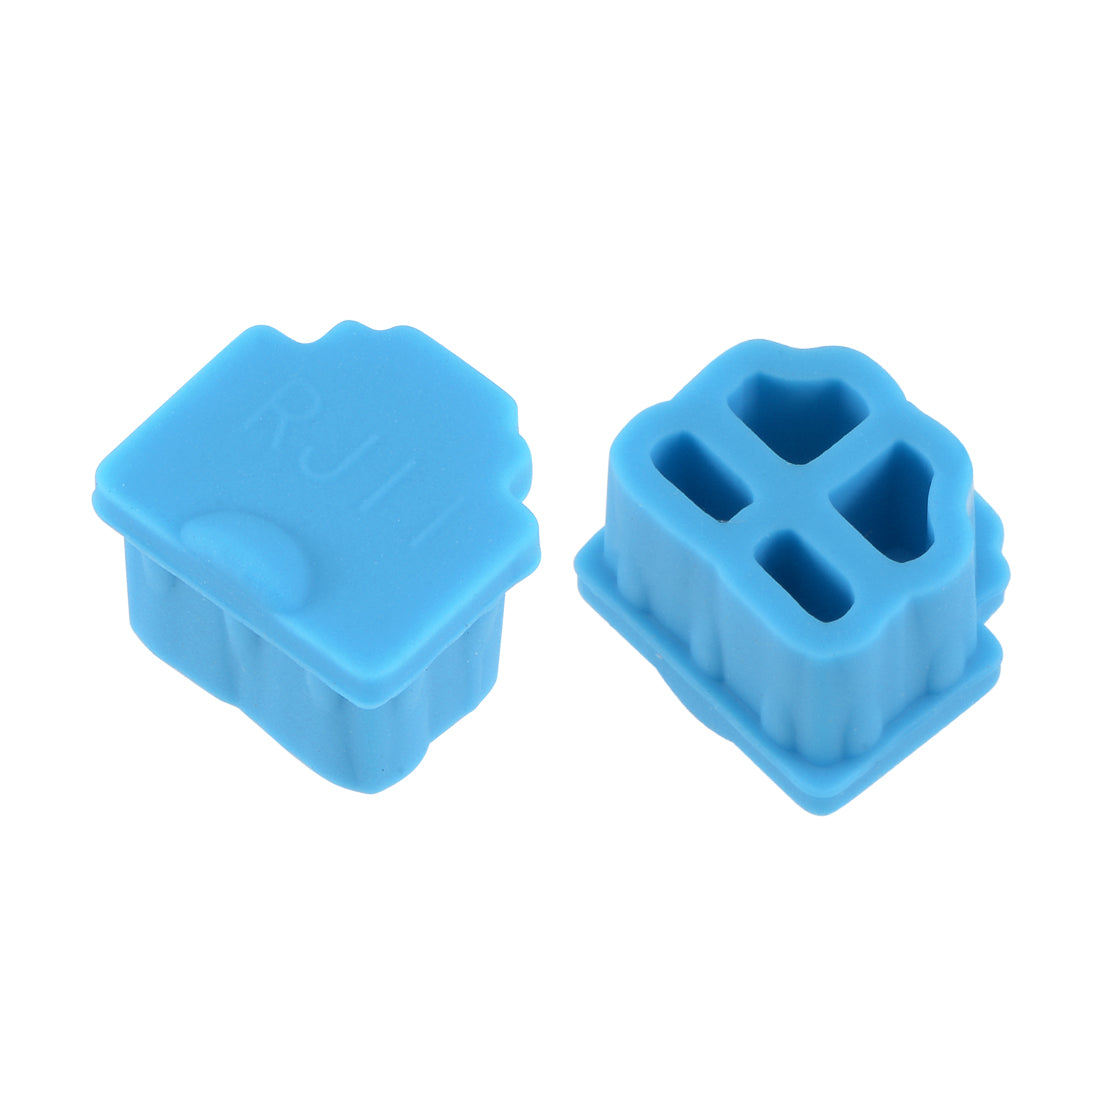 uxcell Uxcell 20pcs RJ11 Silicone Protector Telephone Modular Port Anti Dust Cap Cover, Blue